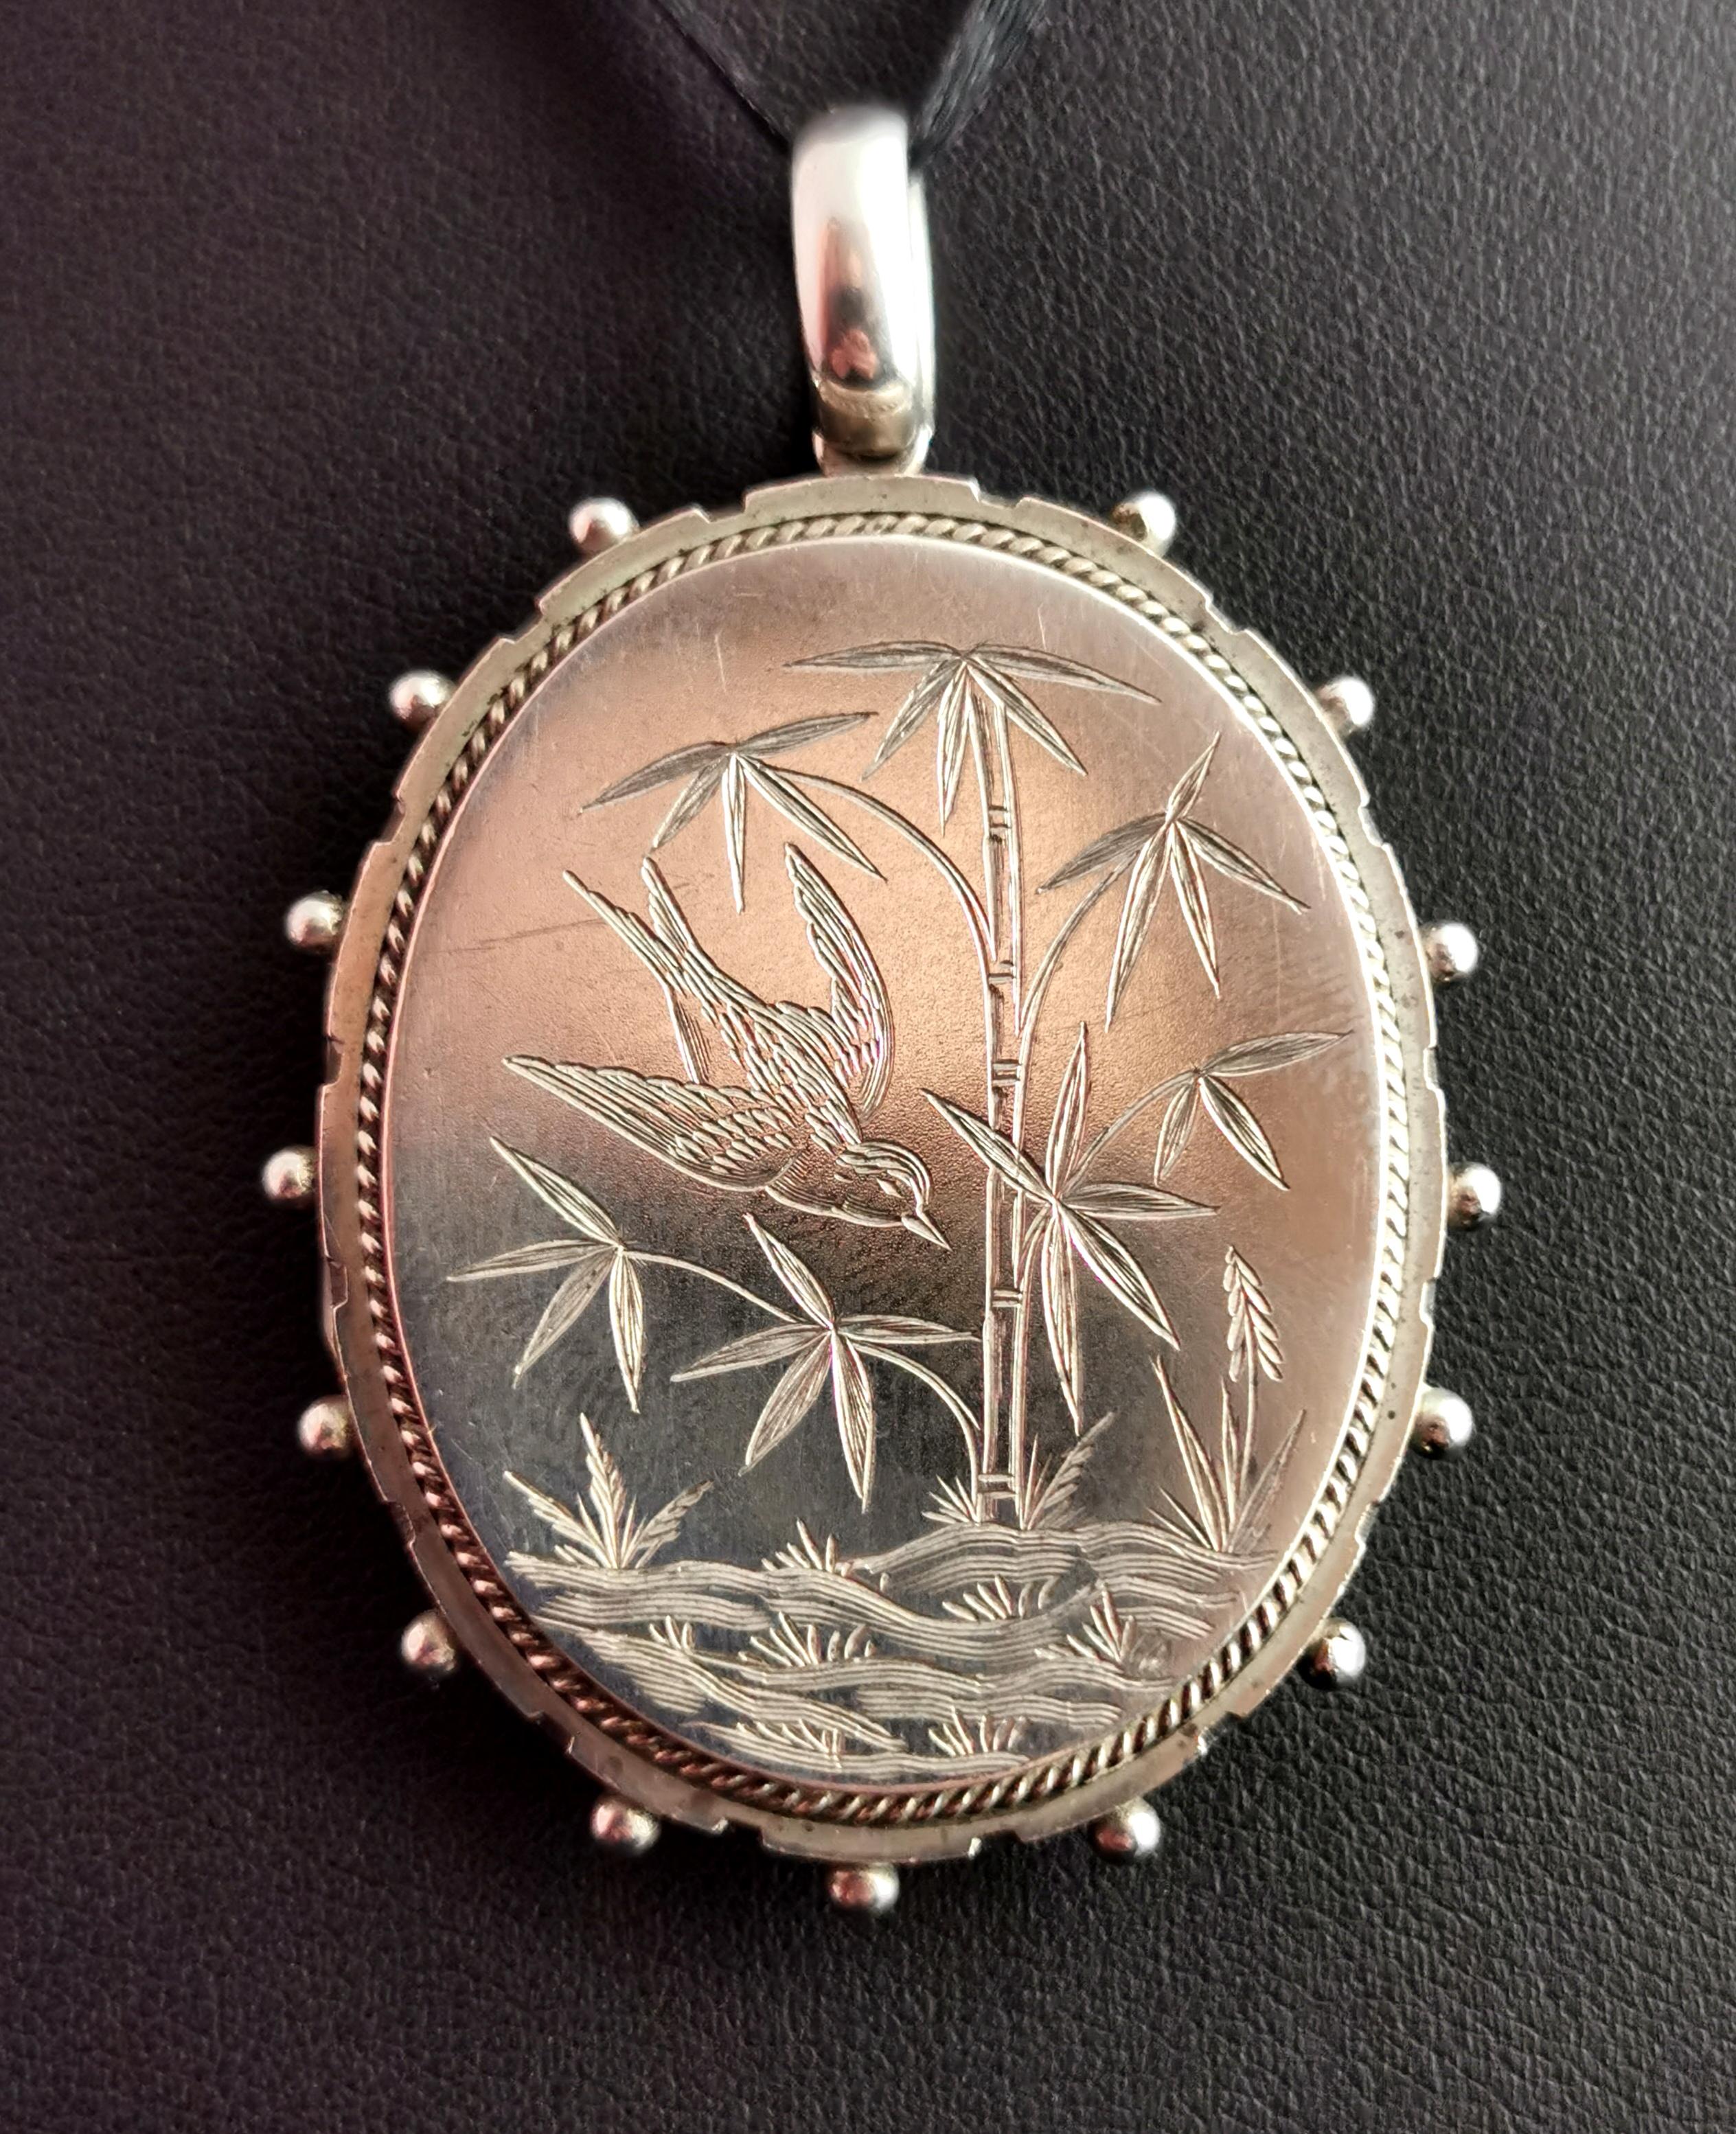 A stunning antique Victorian sterling silver locket pendant.

A large sized oval locket with a beautiful engraving of a Swallow in flight with bamboo and grasslands in the aesthetic manner.

The locket has a smooth reverse and a beaded outer